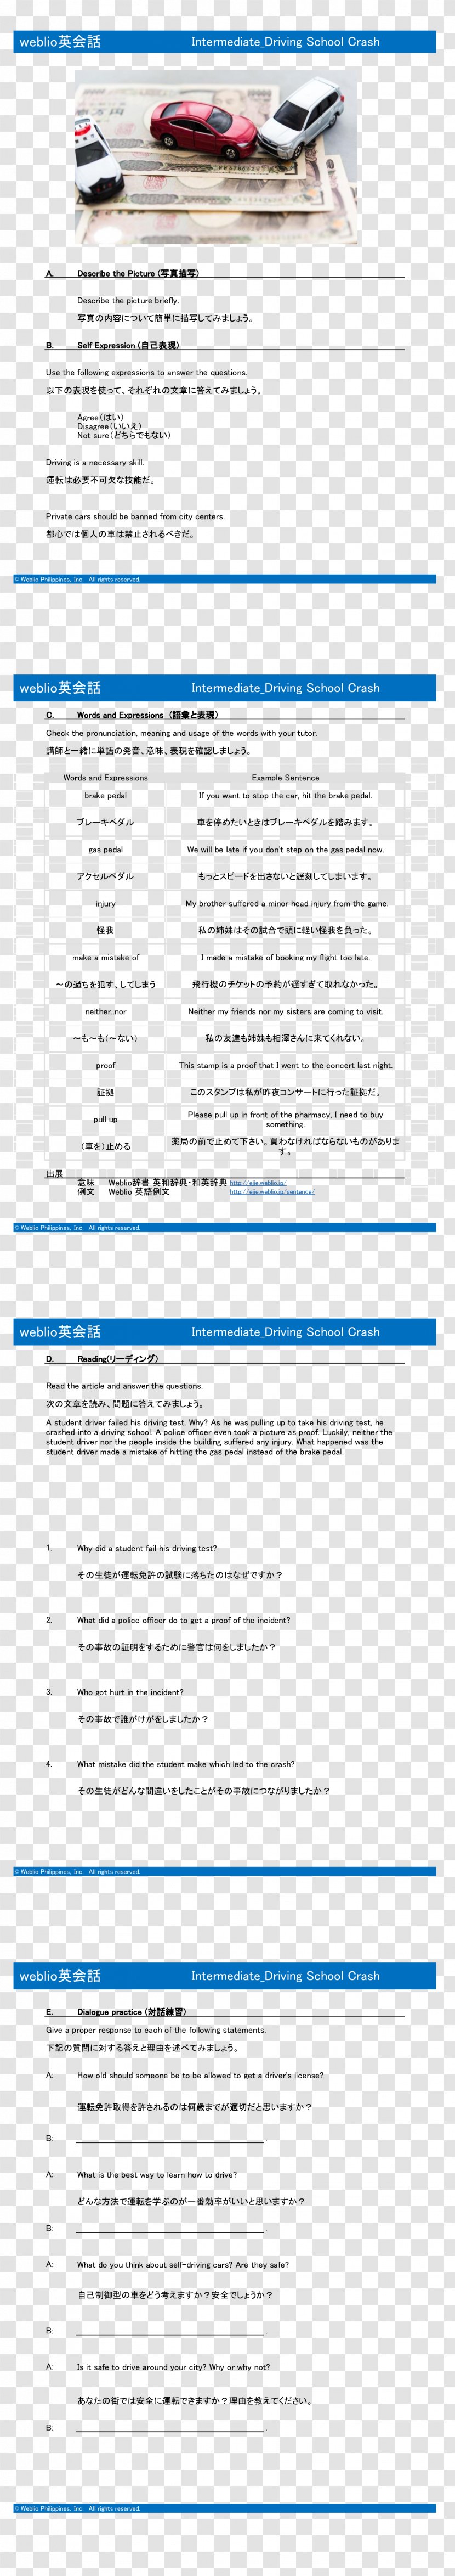 Paper Document Web Page Angle Font - Text - Driving School Transparent PNG